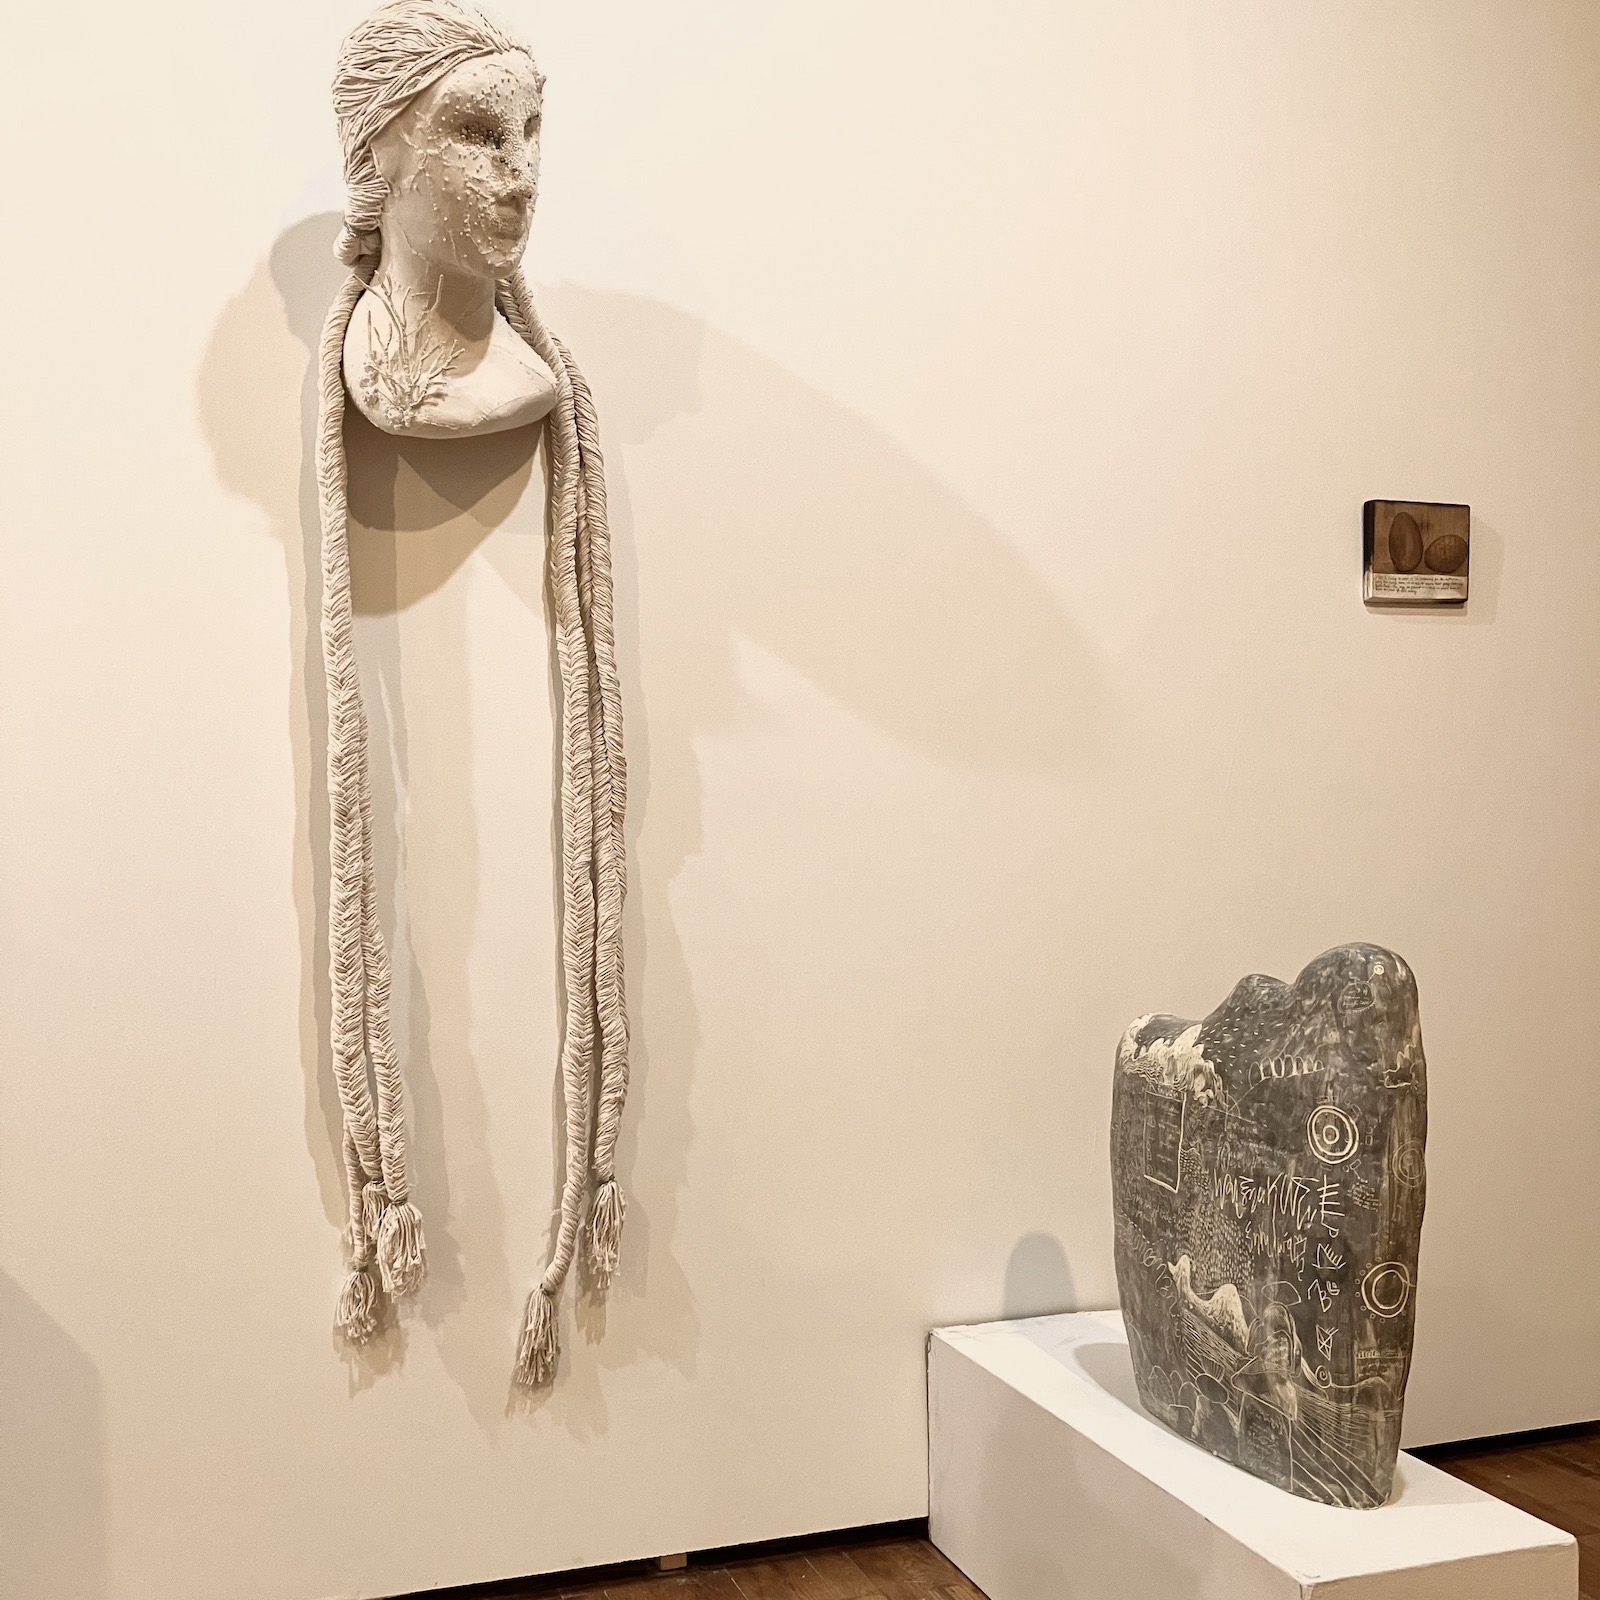 A bust of a woman on the wall with hair drooping down almost to the floor